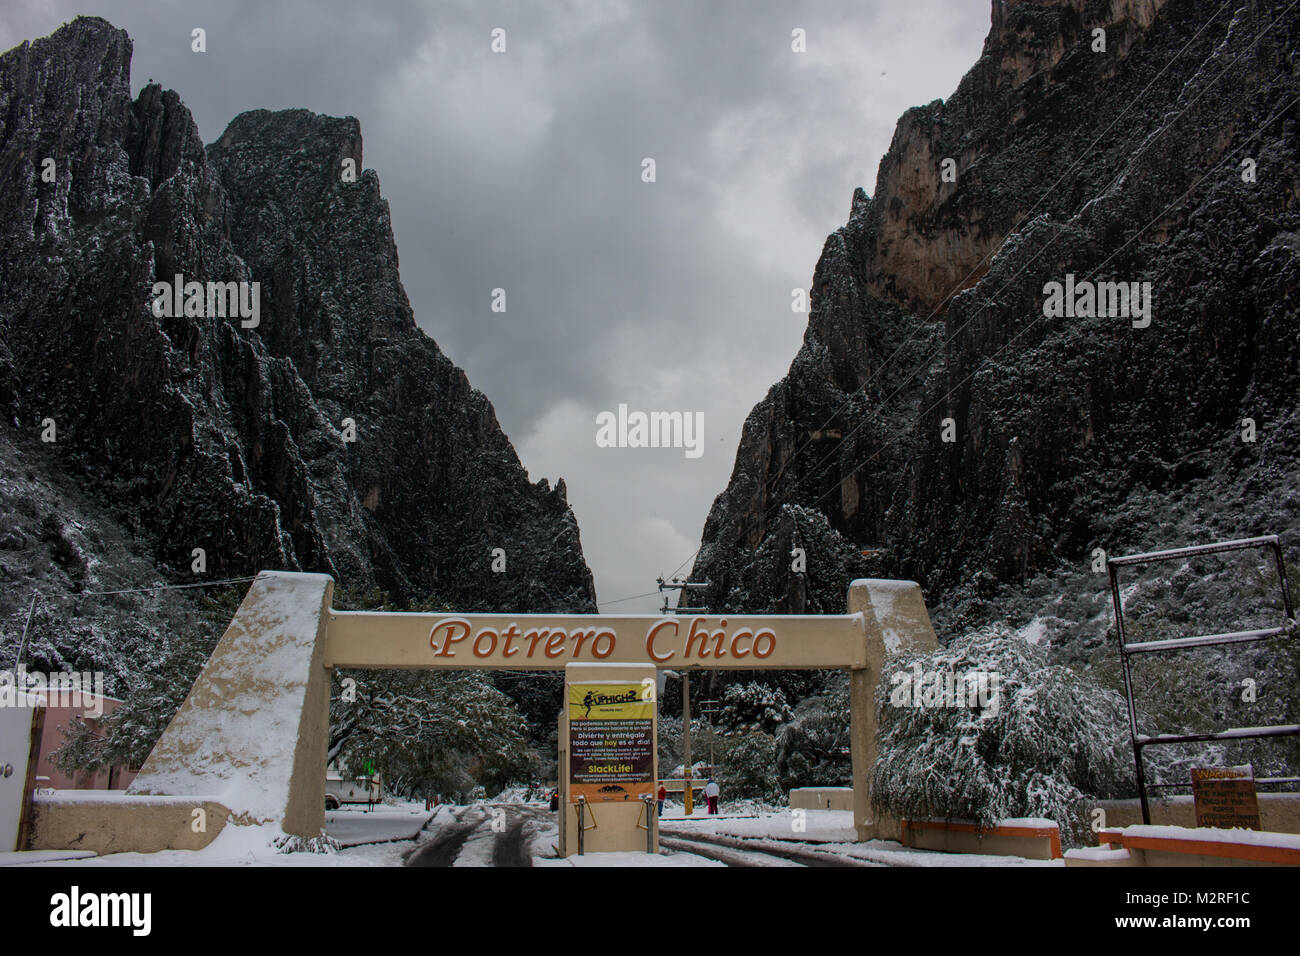 Pictures taken during historical snowfall in the town of Hidalgo, N.L. Mexico. Home of the famous Potrero Chico climbing area Stock Photo